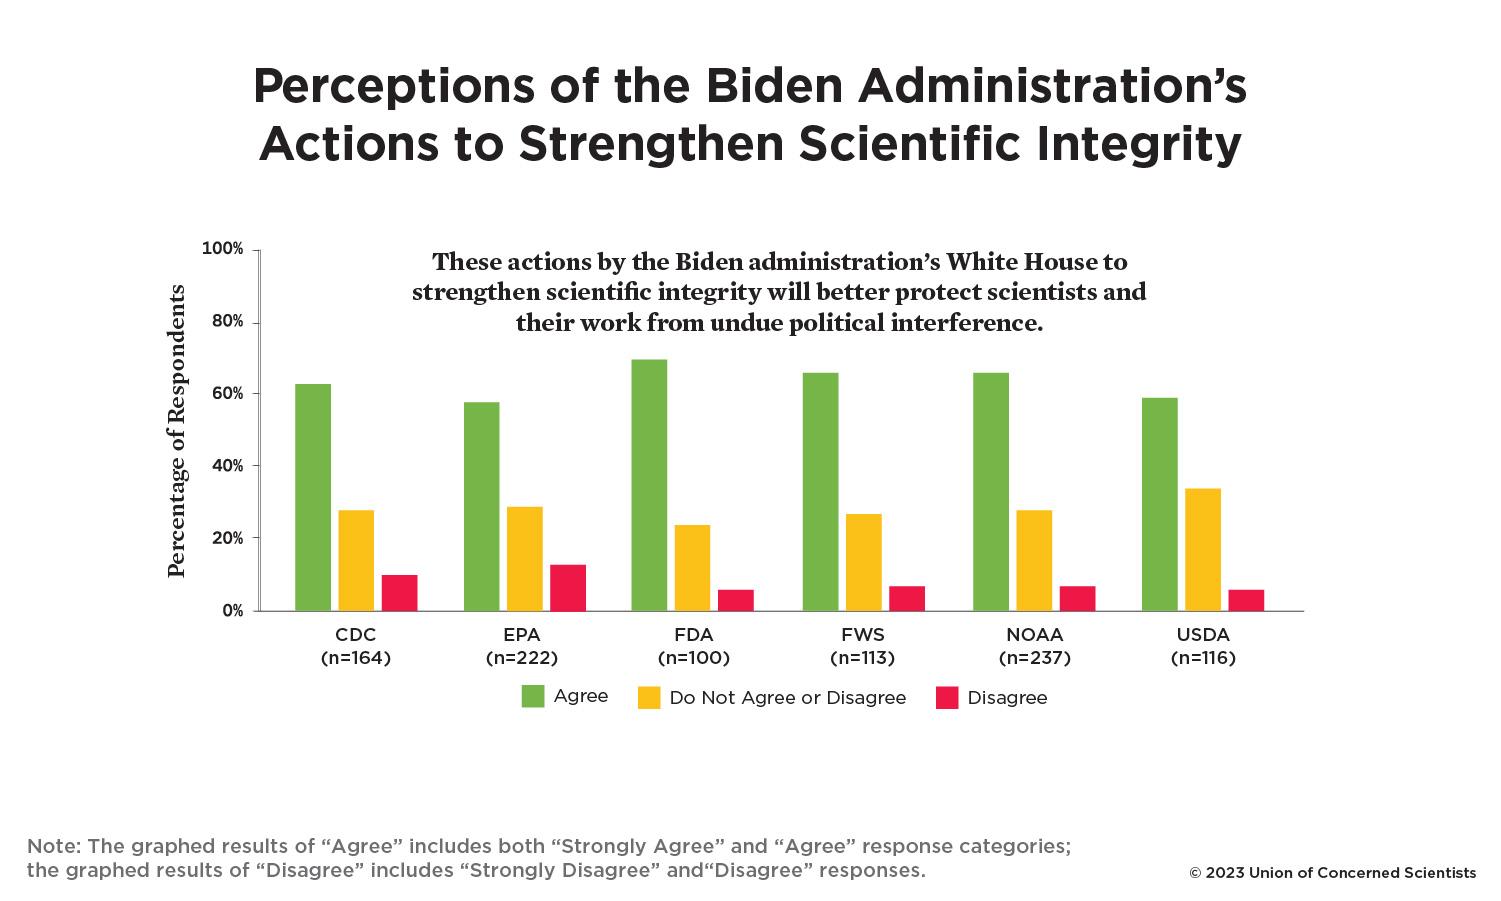 A bar graph showing perceptions of the Biden administration's actions to strengthen scientific integrity.